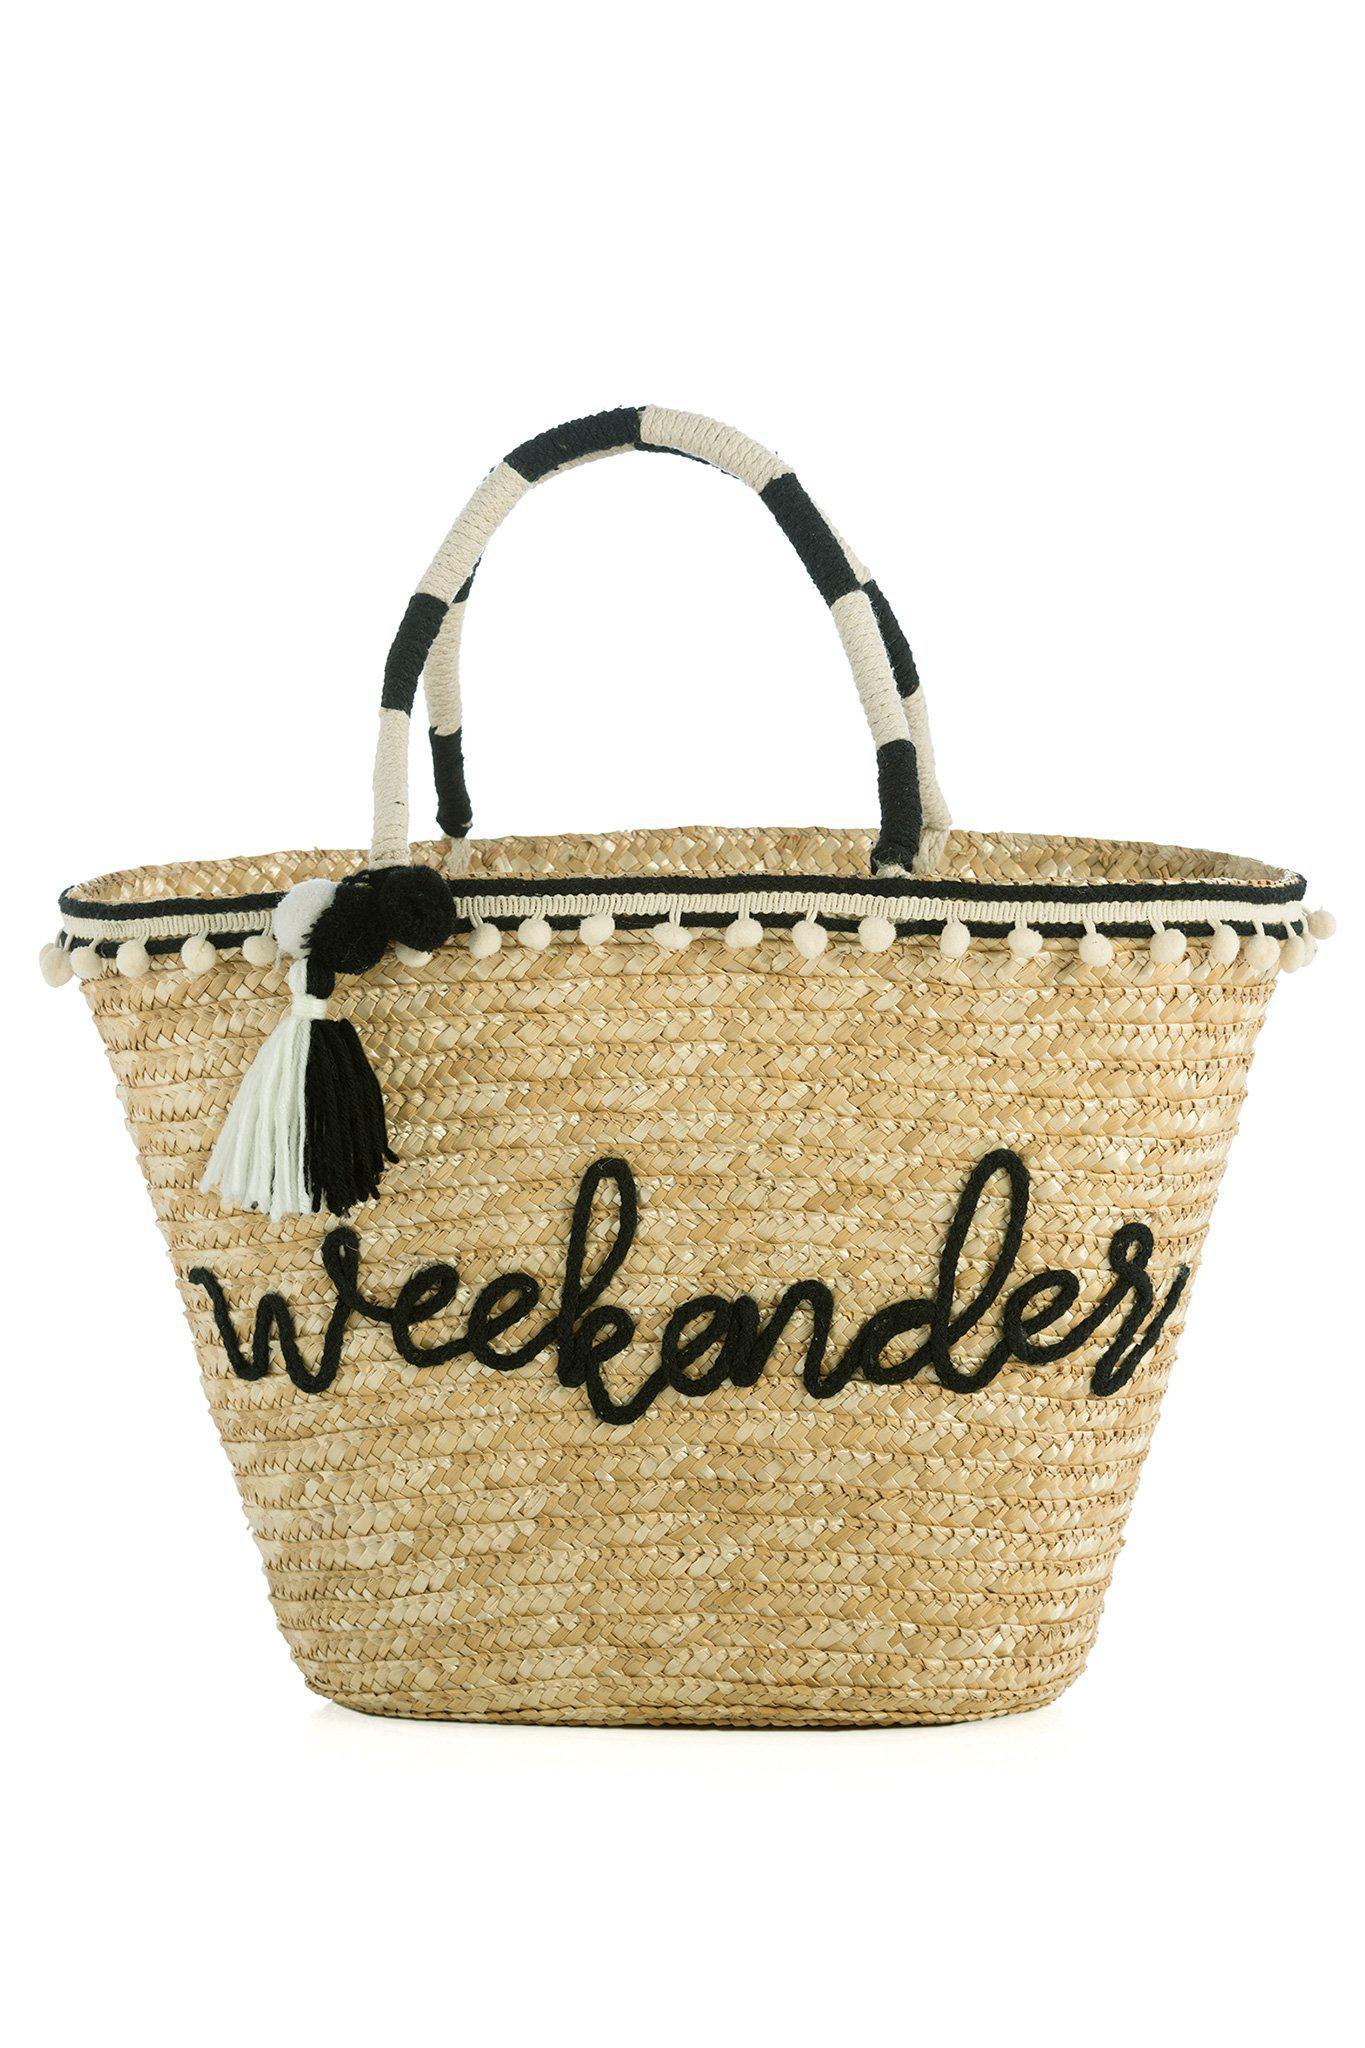 Weekender Straw Tote Bag on white background